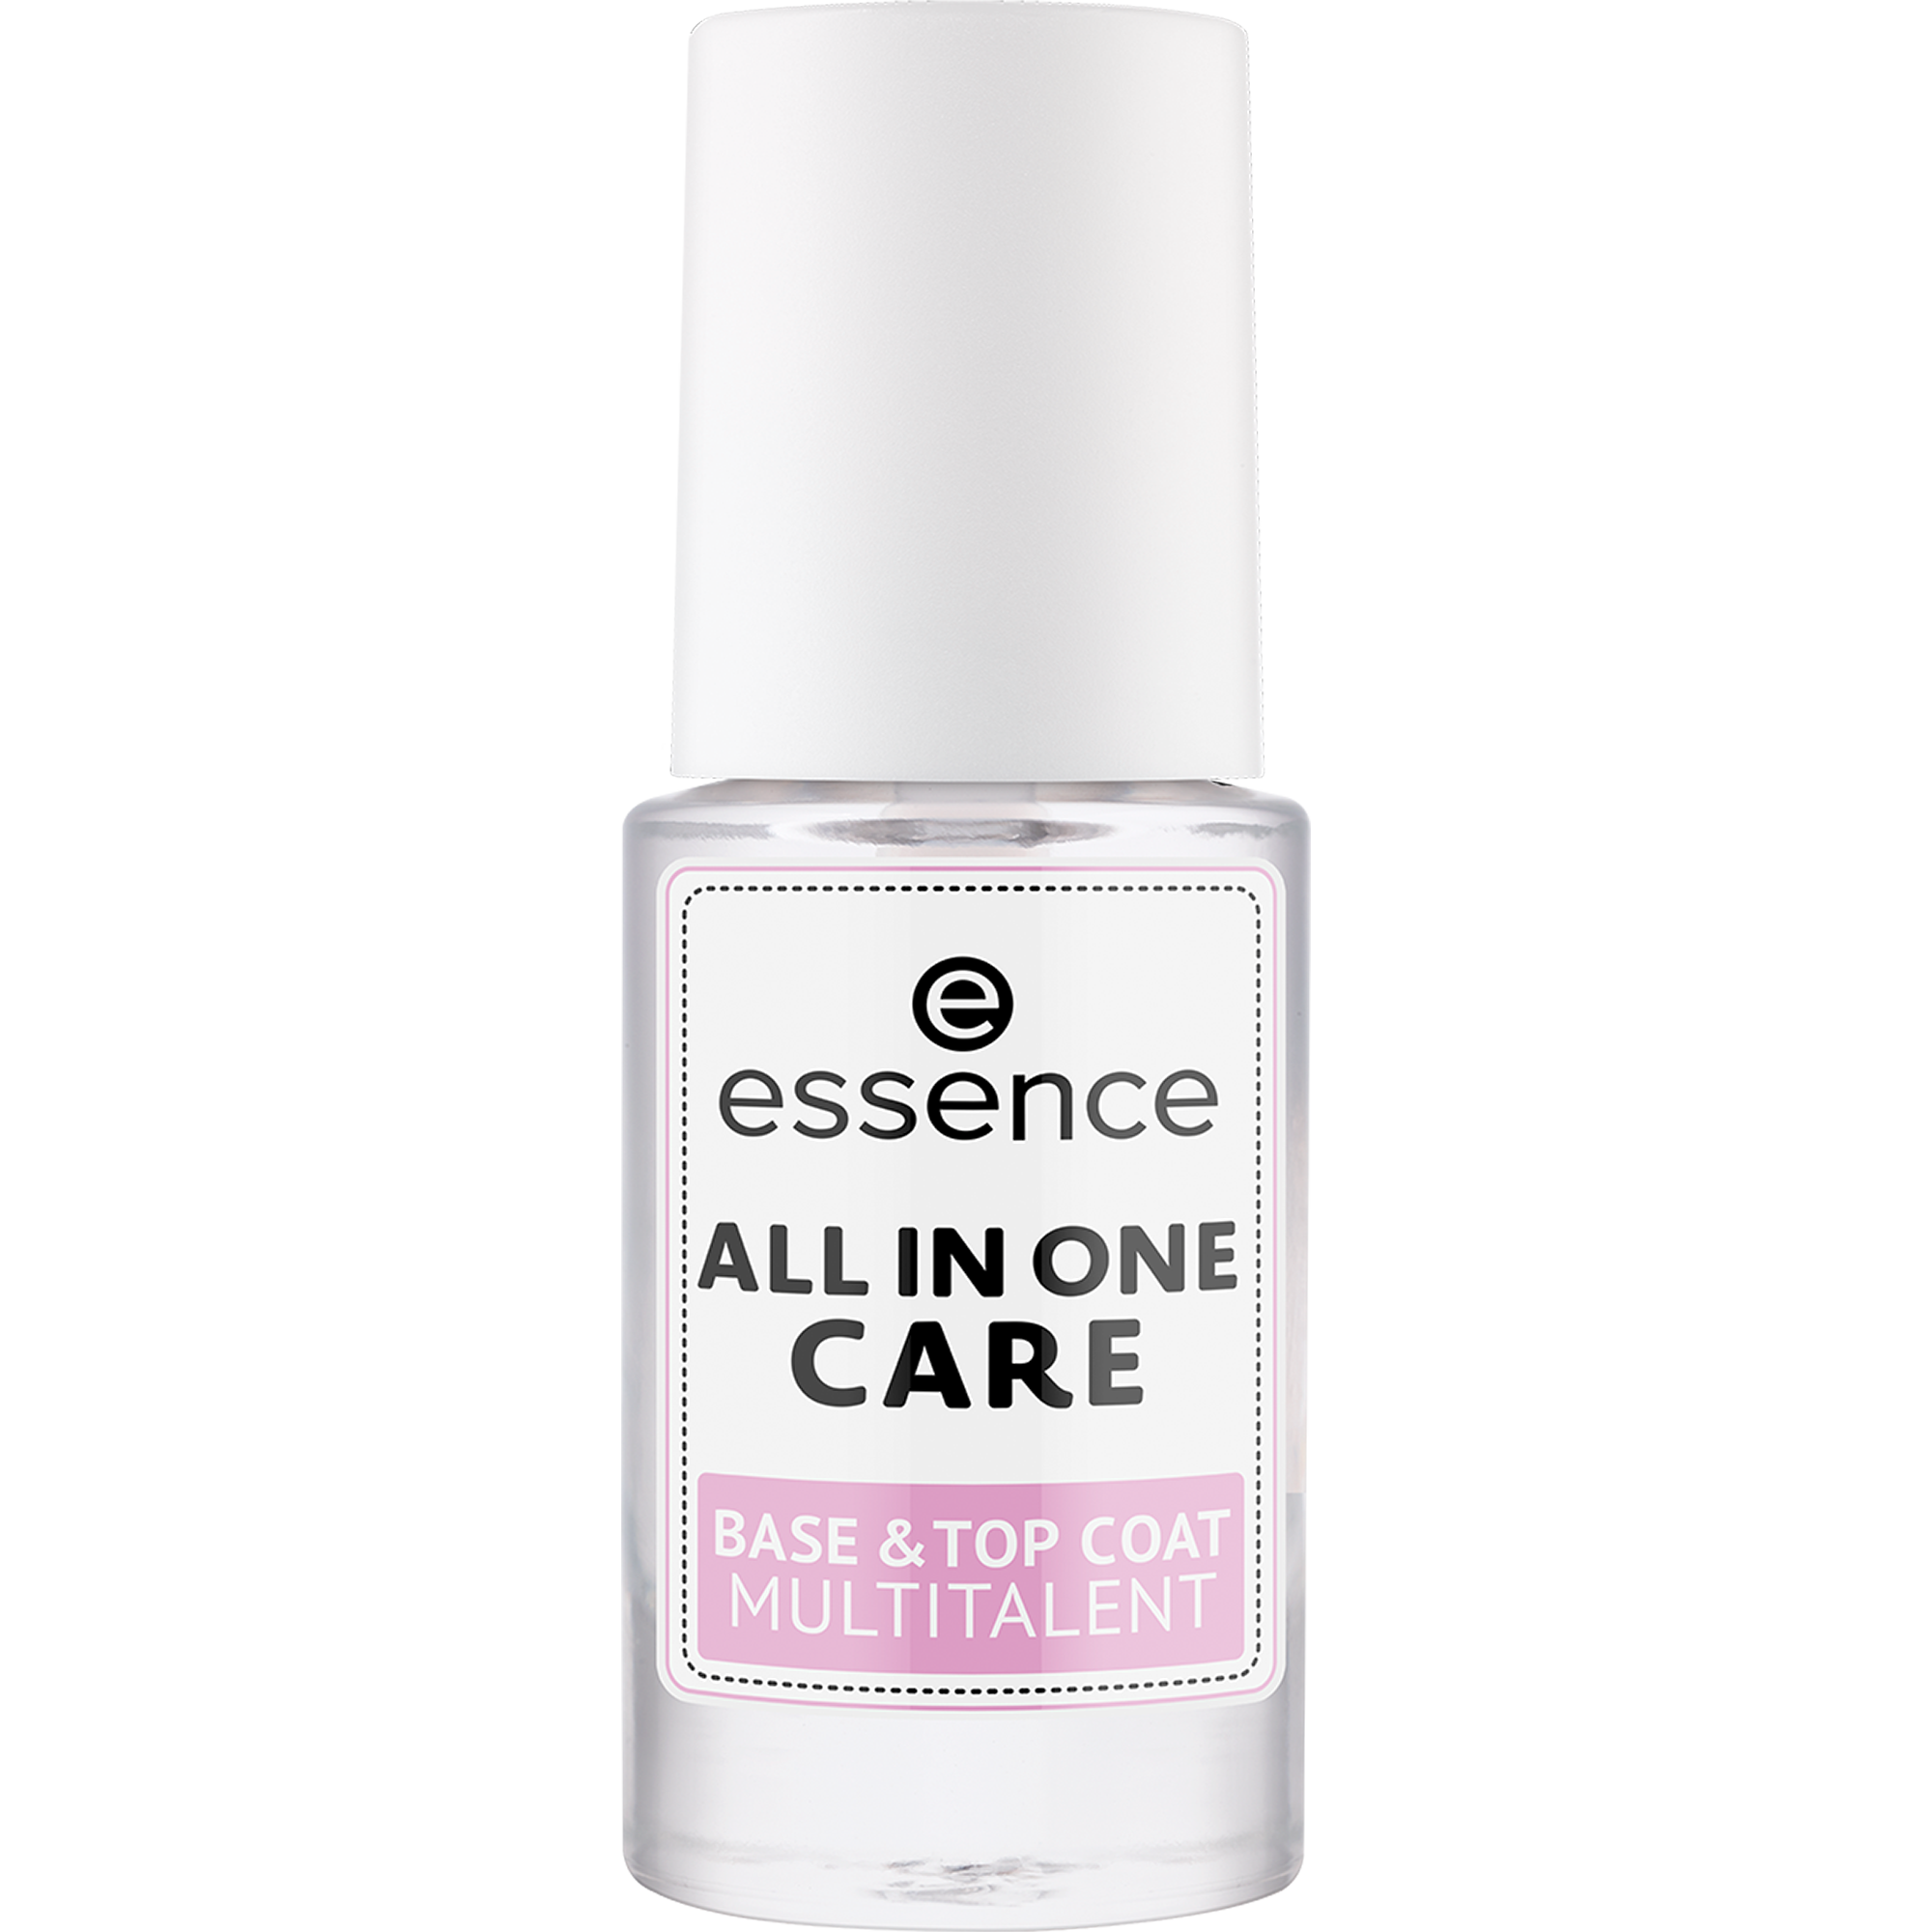 ALL IN ONE CARE base y top coat multitalento